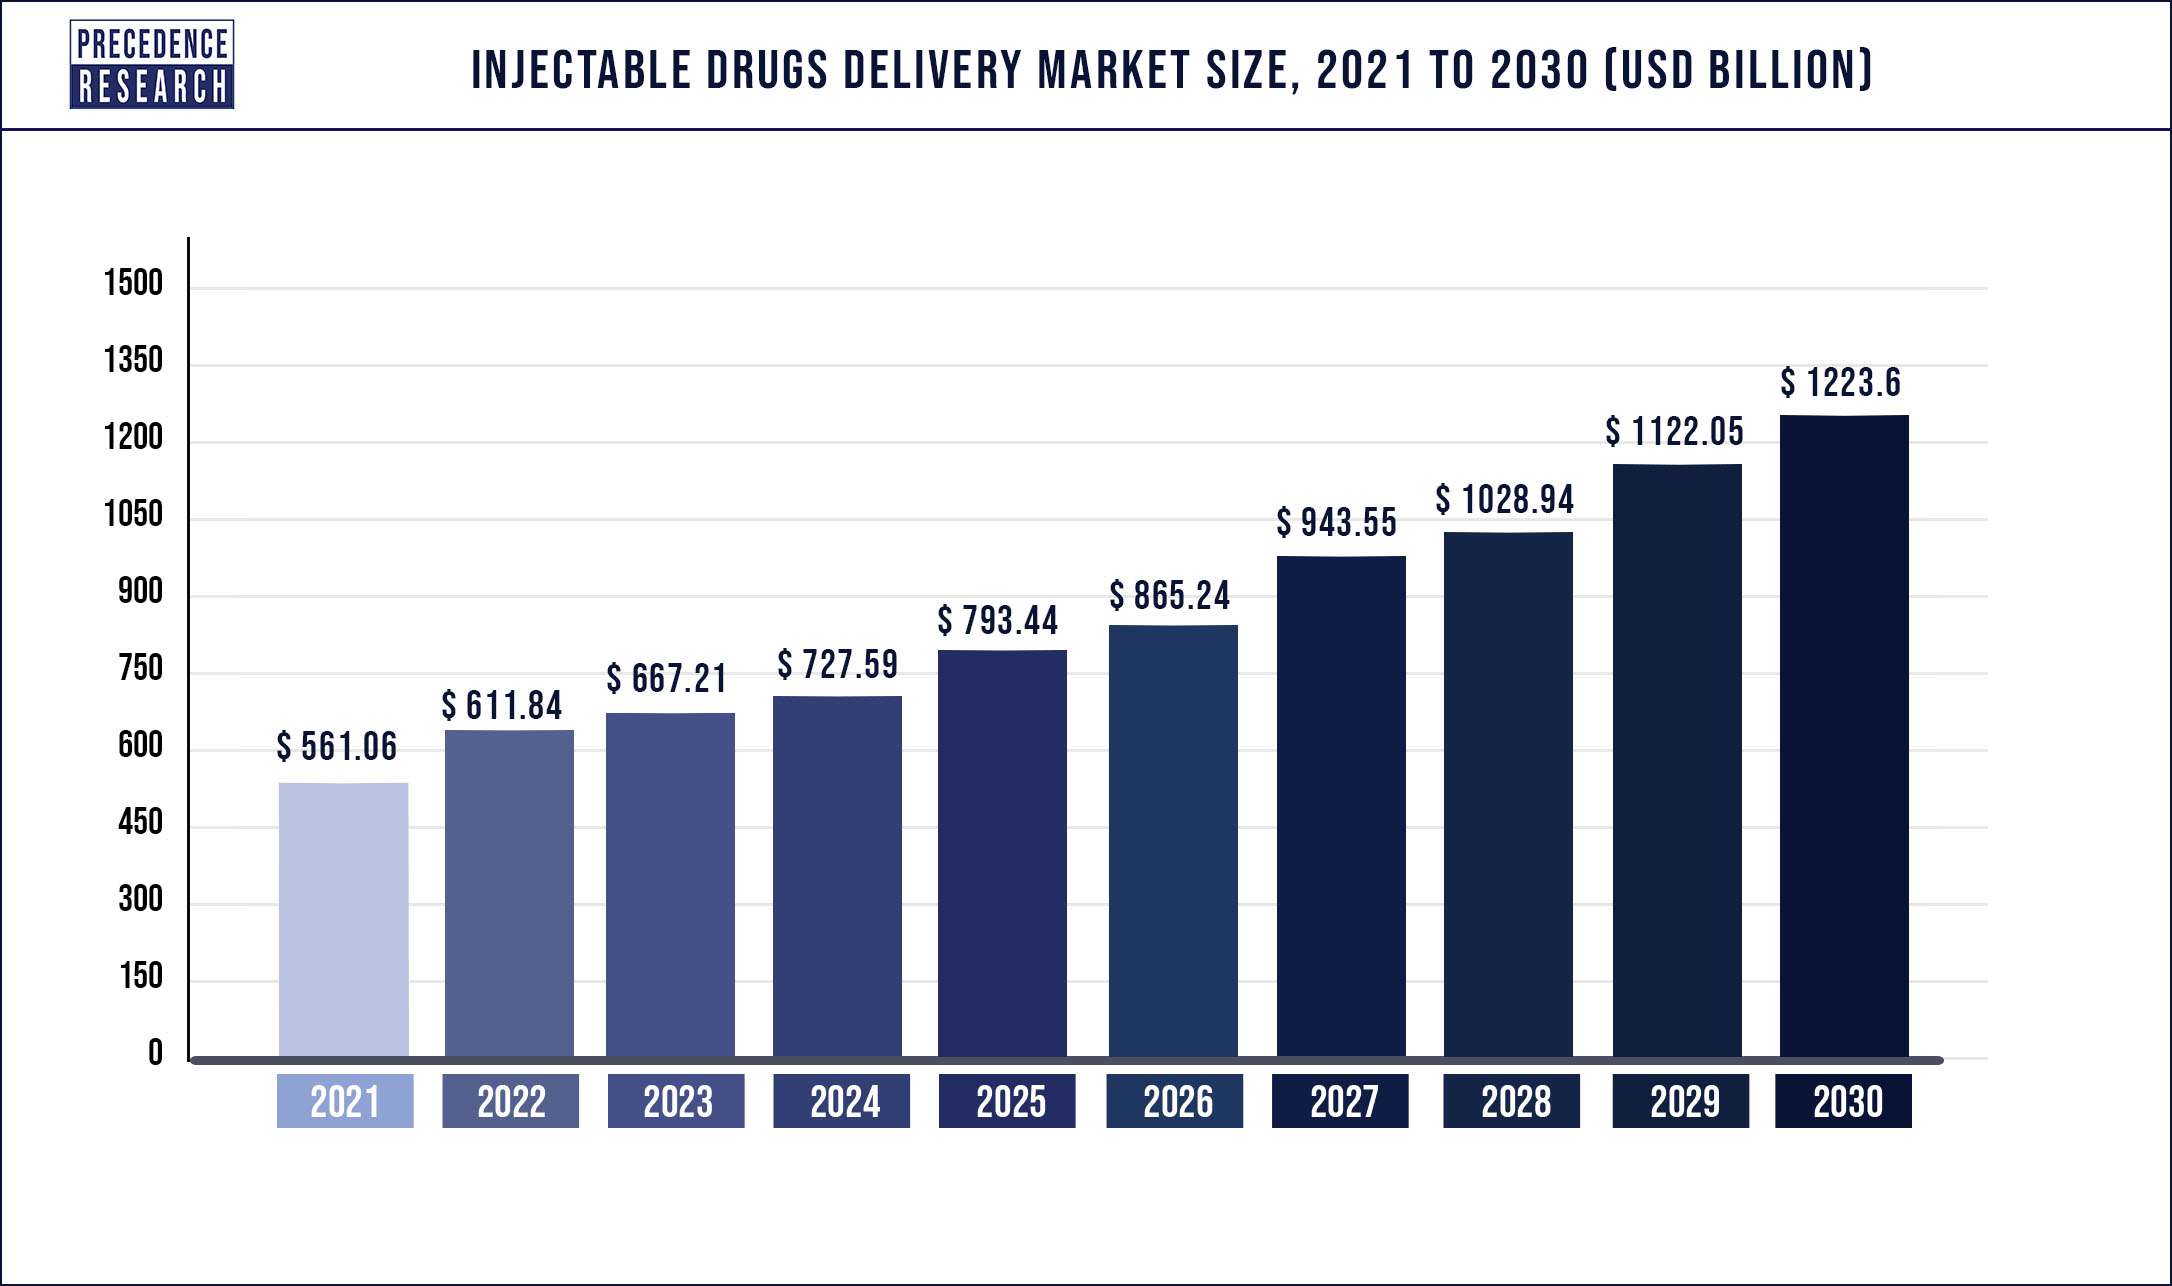 Injectable Drugs Delivery Market Size 2021 to 2030